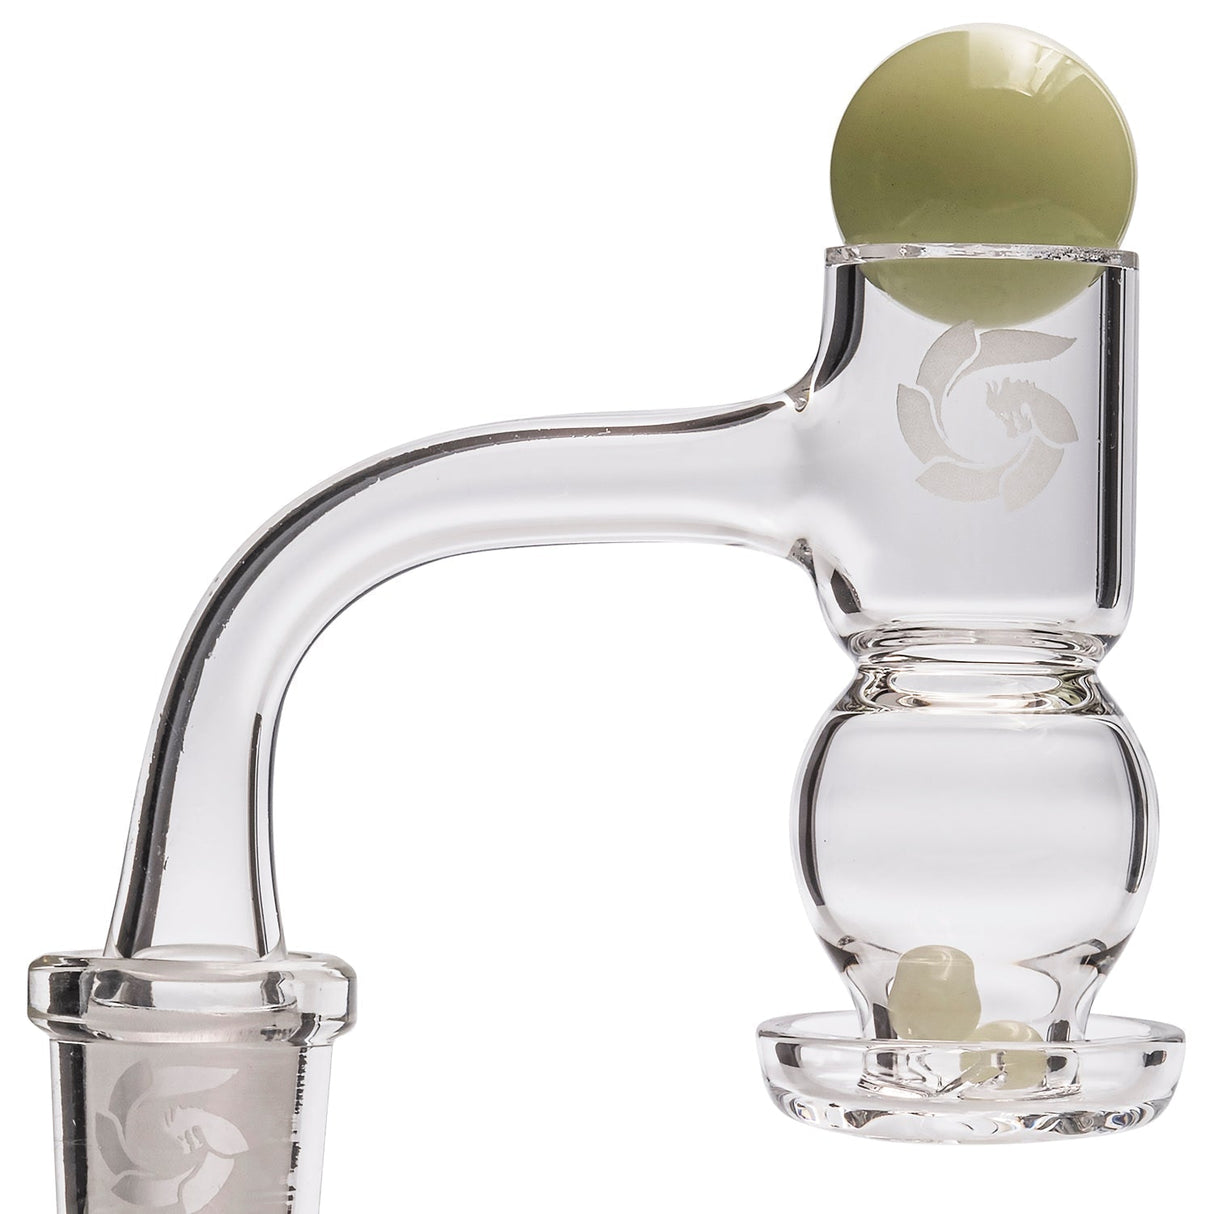 Glasshouse Egg Terp Banger Kit with Beveled Top and Circular Egg Pearl, 90 Degree Male Joint